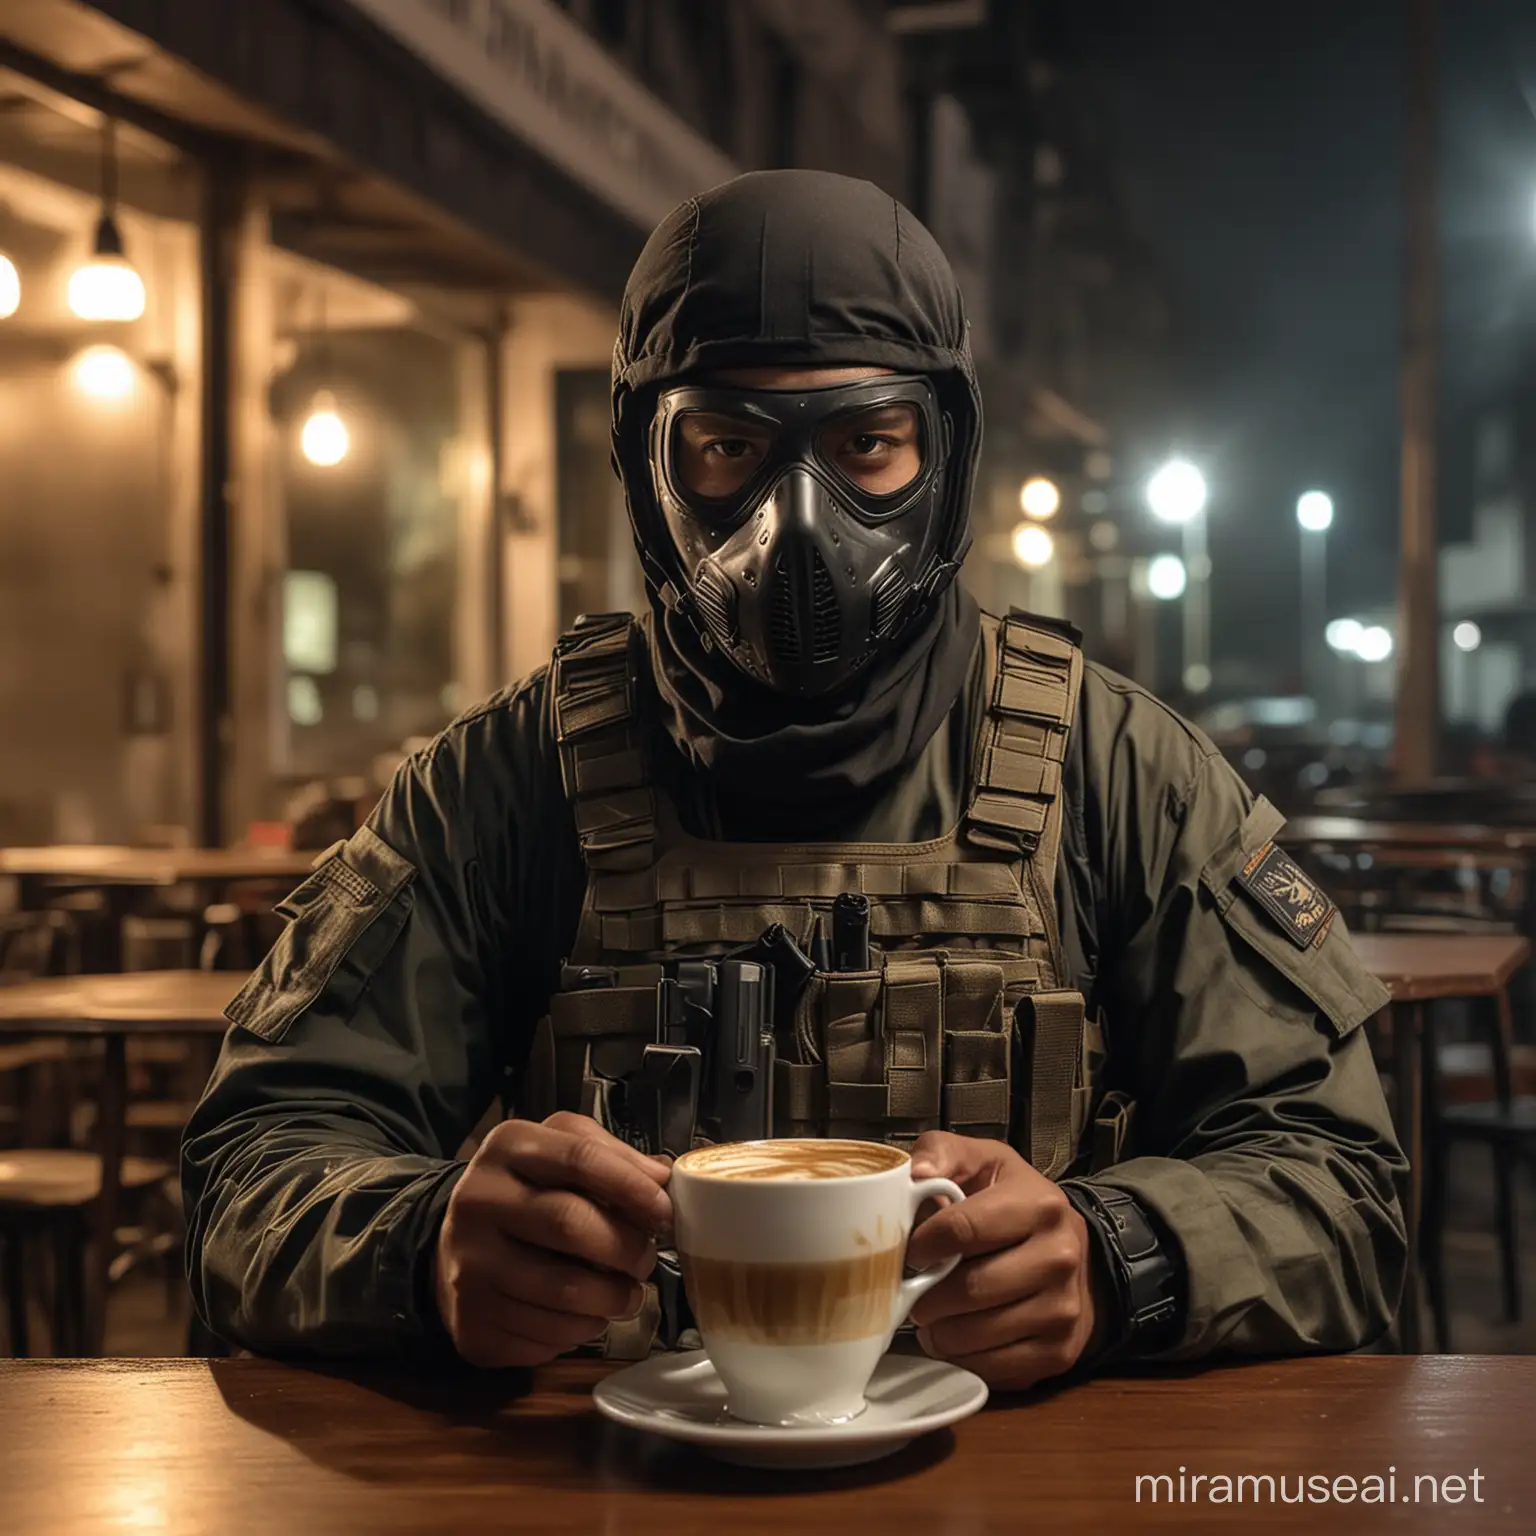 A Malaysia Komando full tactical gear, wearing half normal mask,in a cafe at night,holding a cappuccino coffee, Smoky background, Serious face